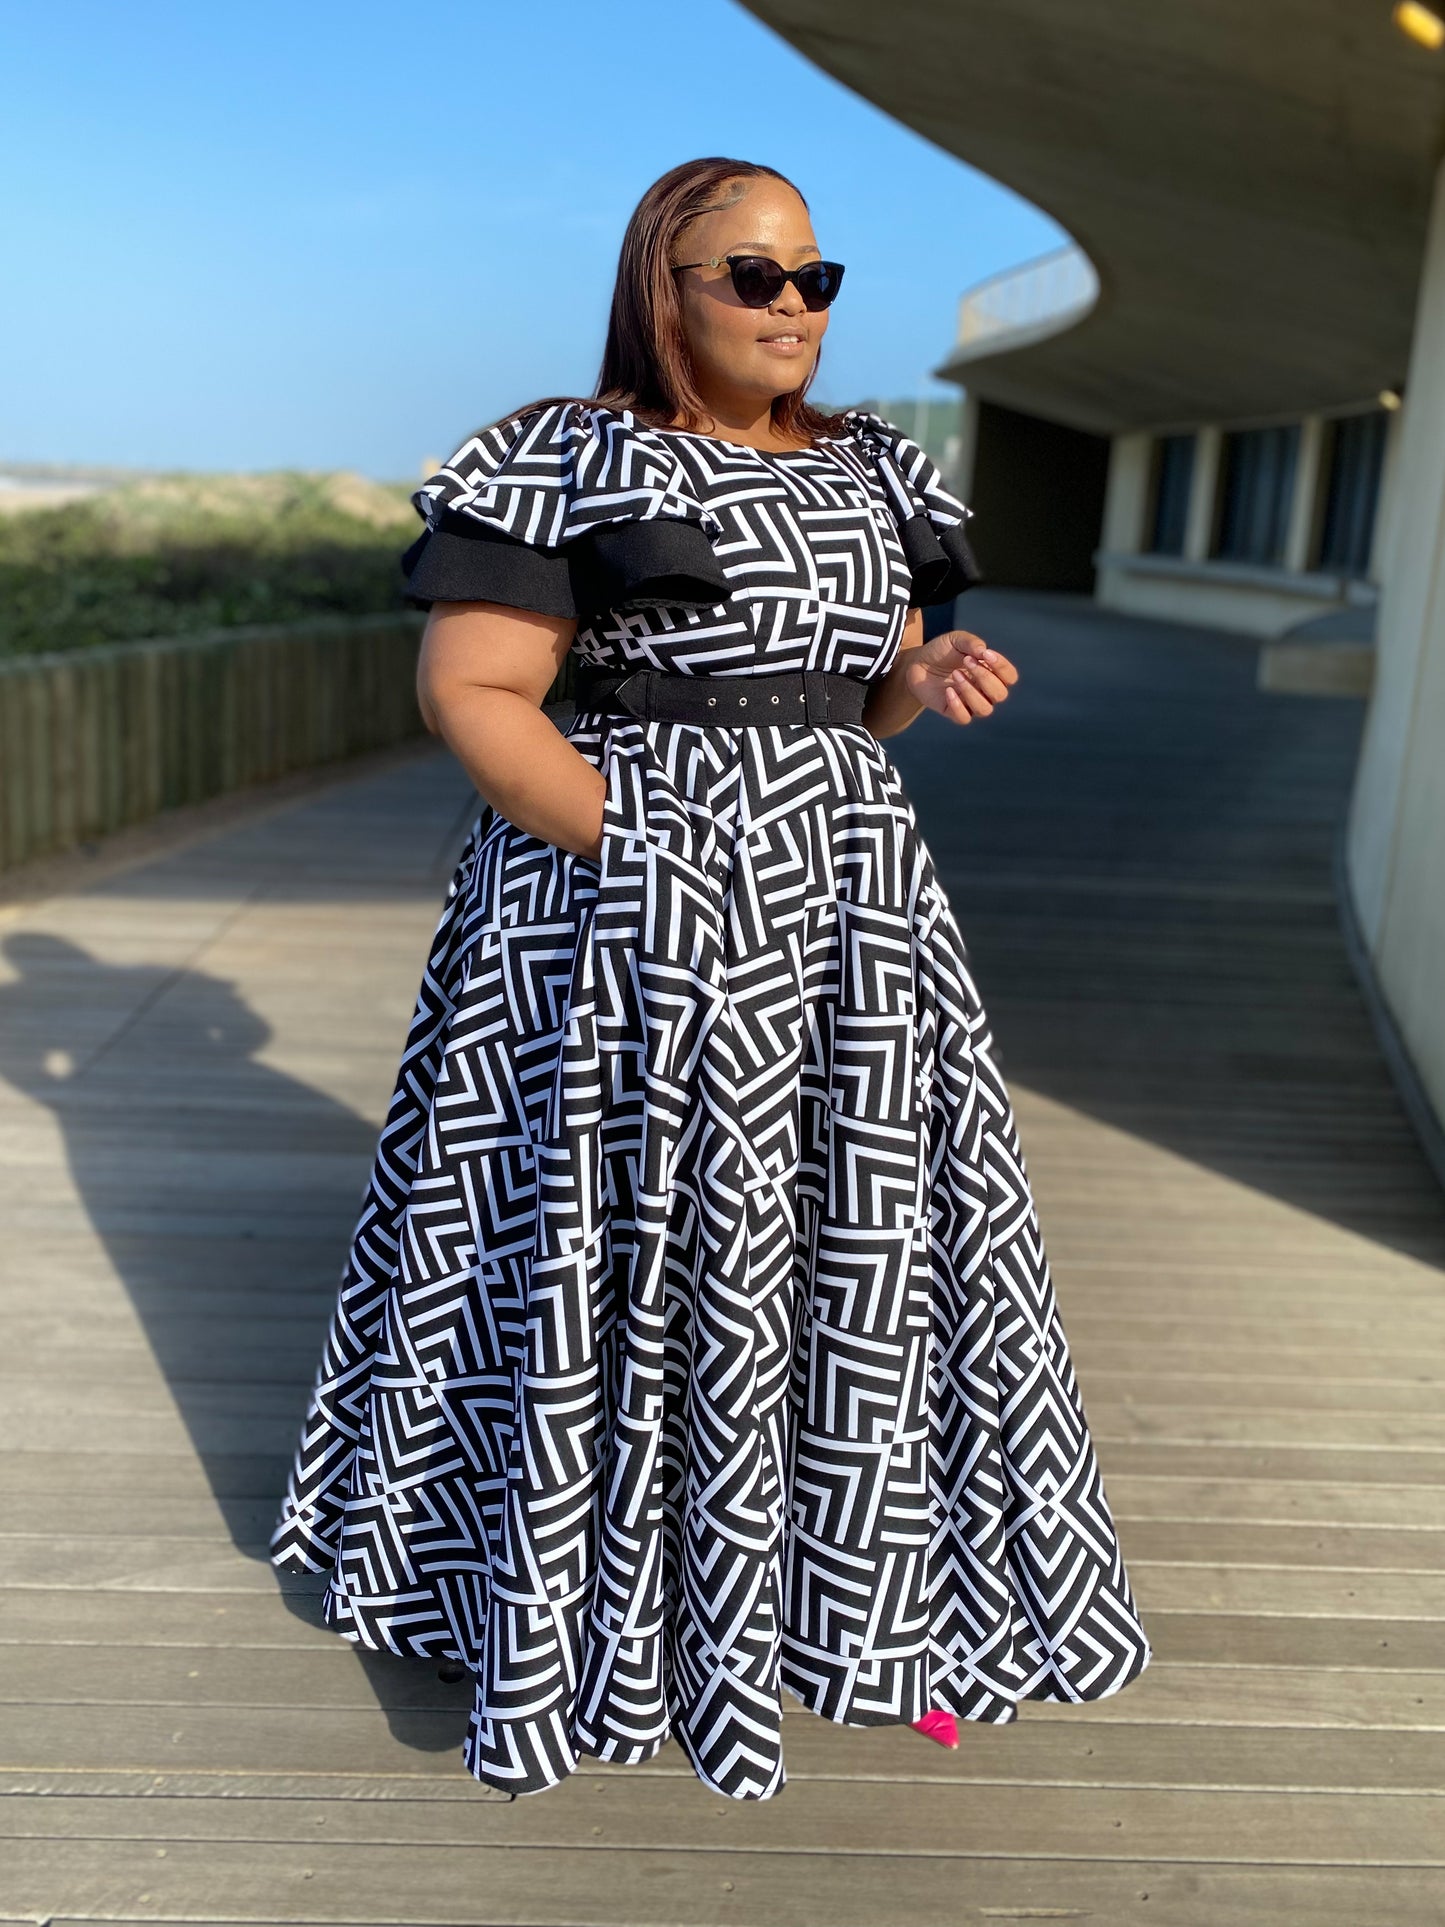 Londekile Maxi Dress (allow 3-5 days for completion of order)